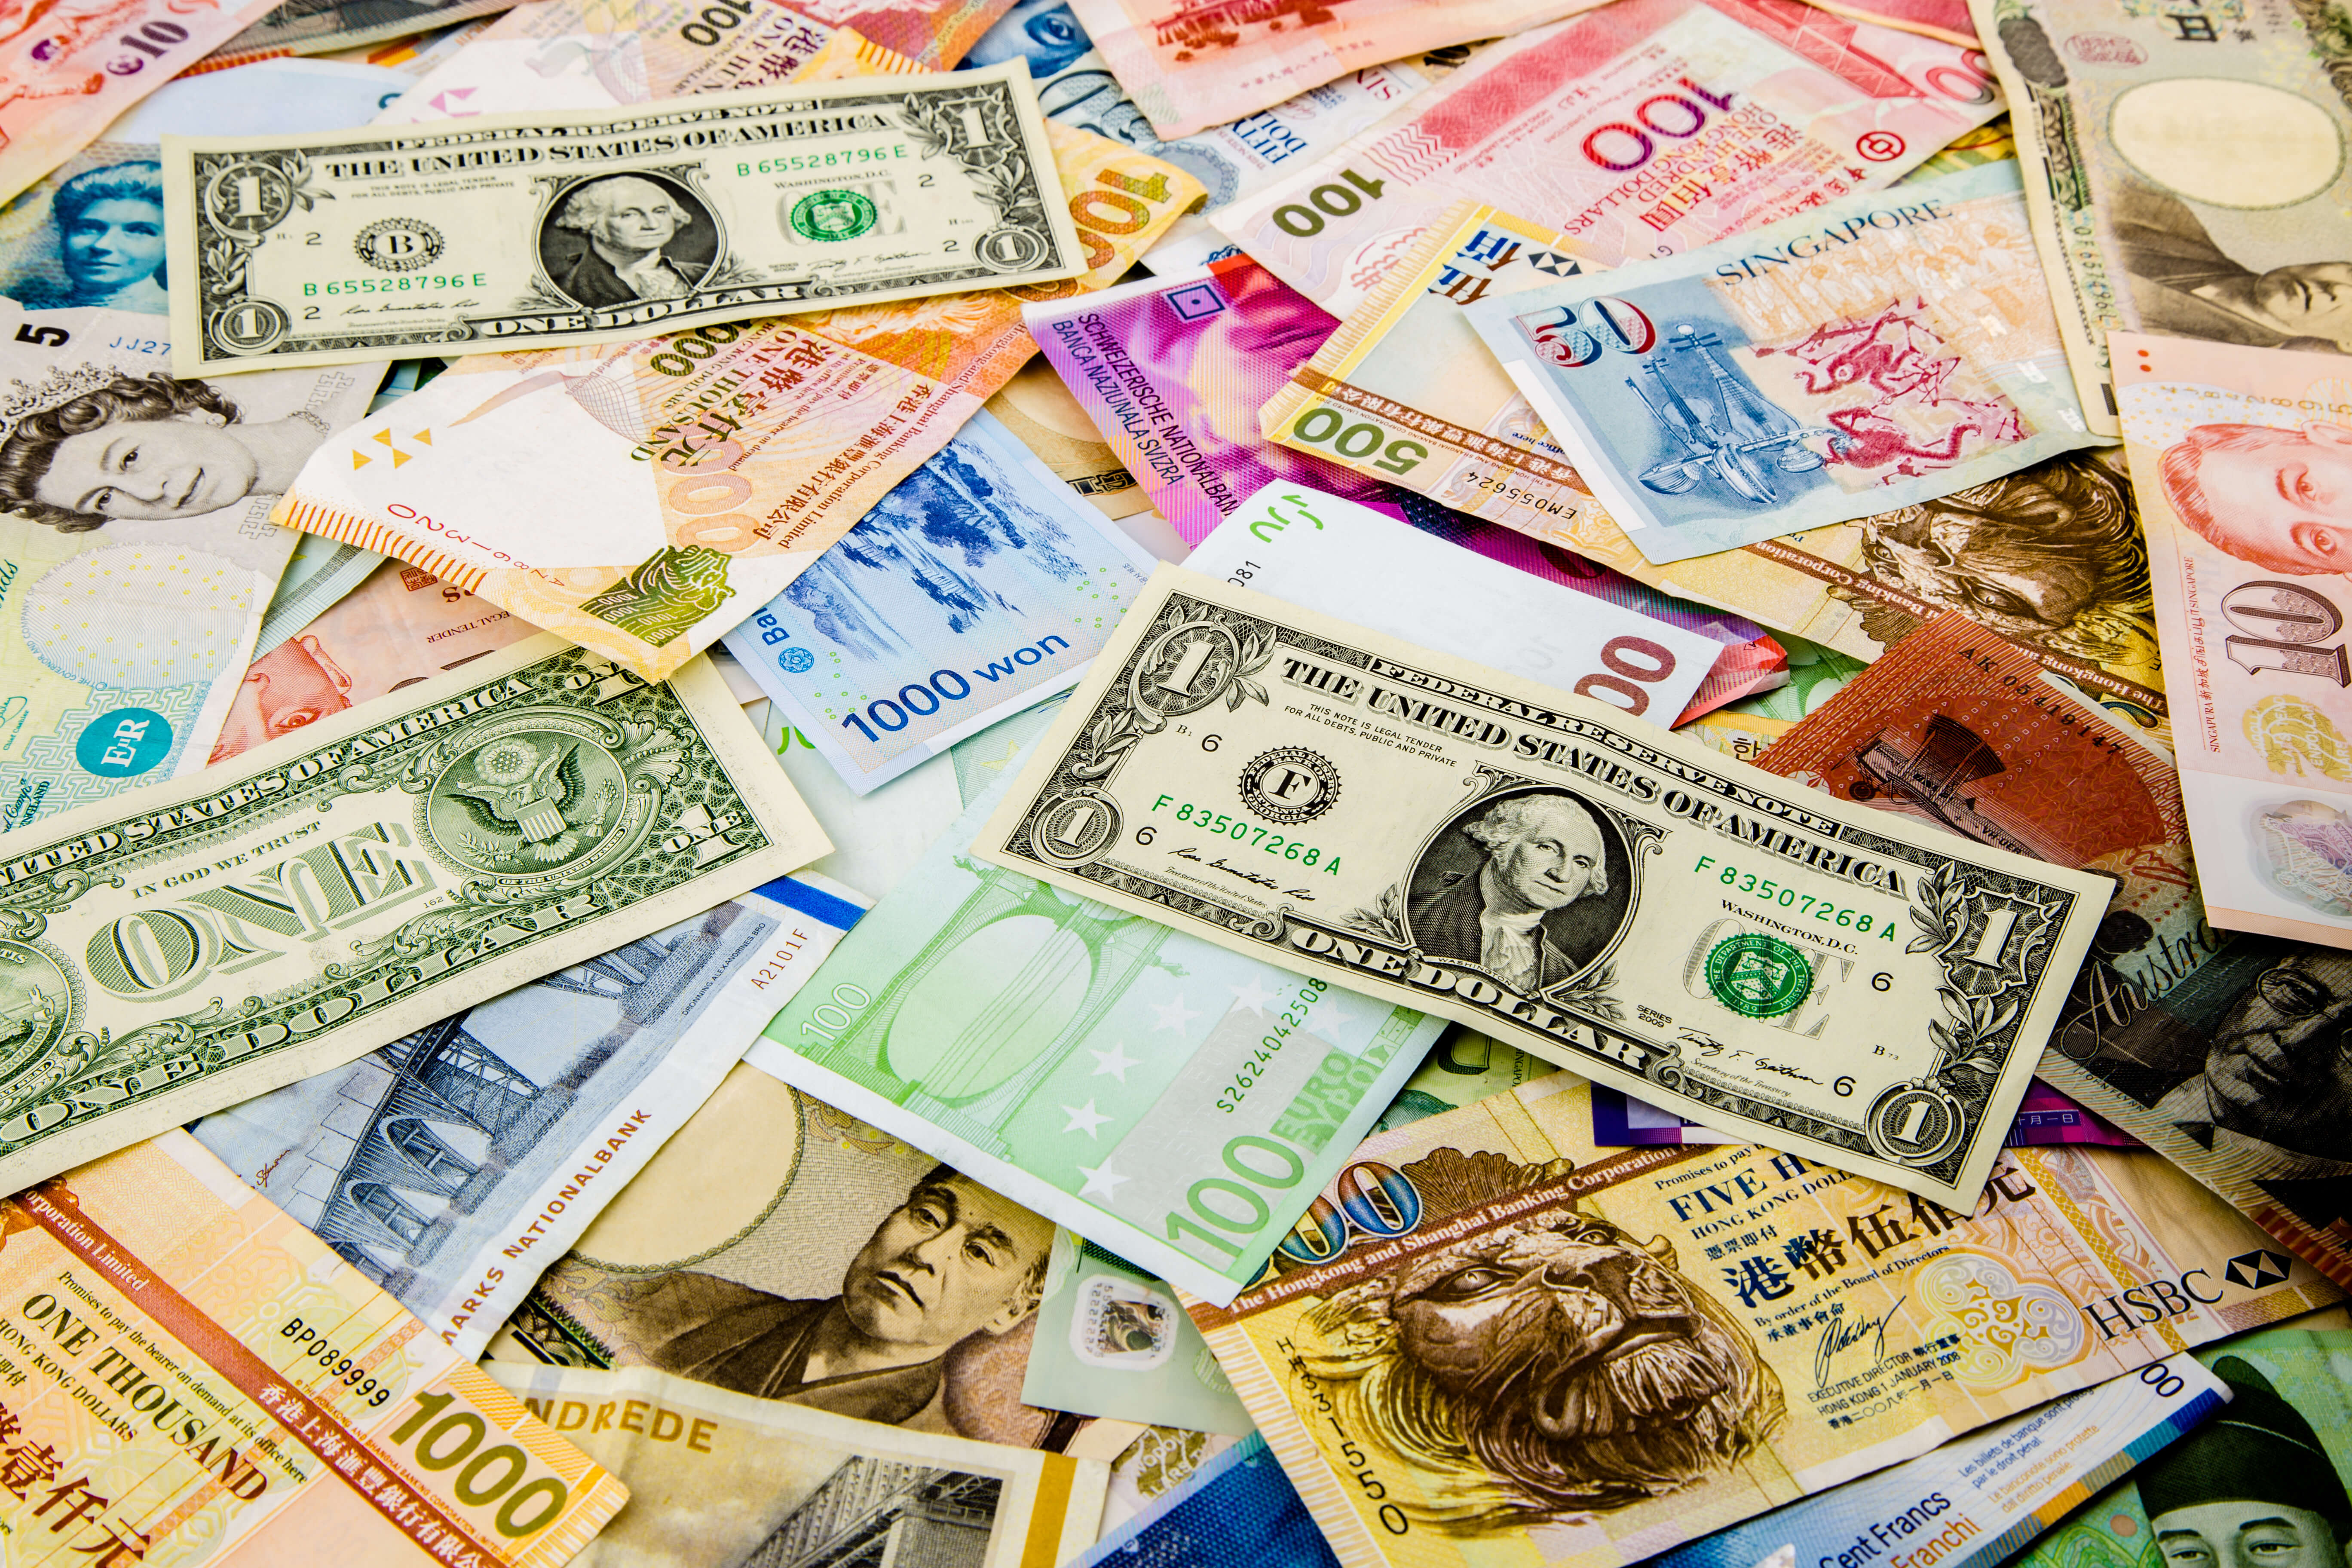 USD, GBP, and other currencies